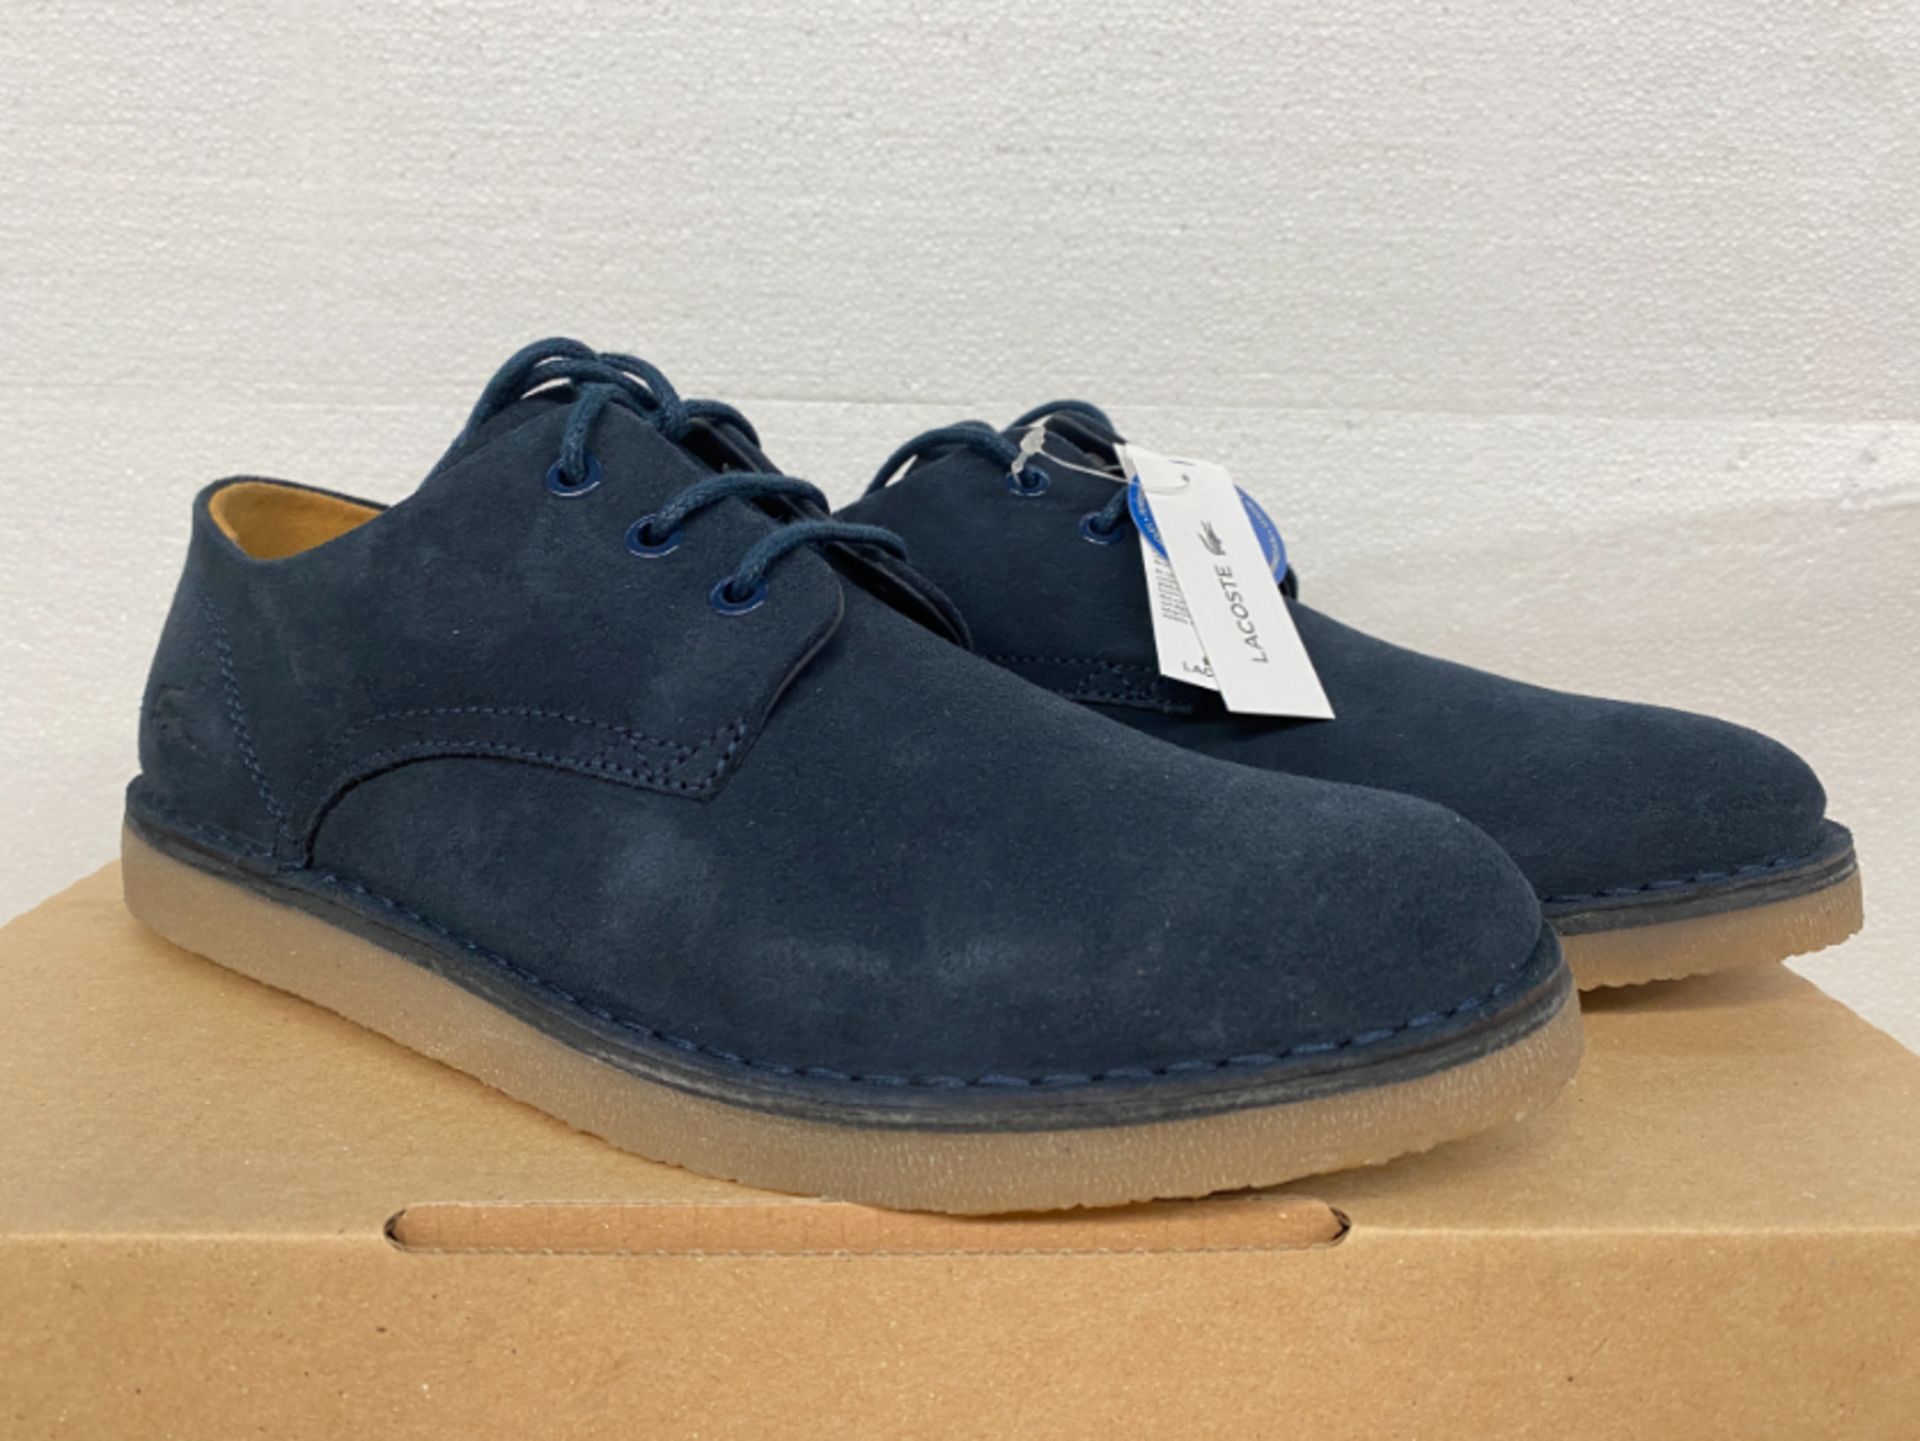 1 LOT TO CONTAIN AN AS NEW BOXED PAIR OF LA COSTE UK SIZE 8 SHOE IN NAVY